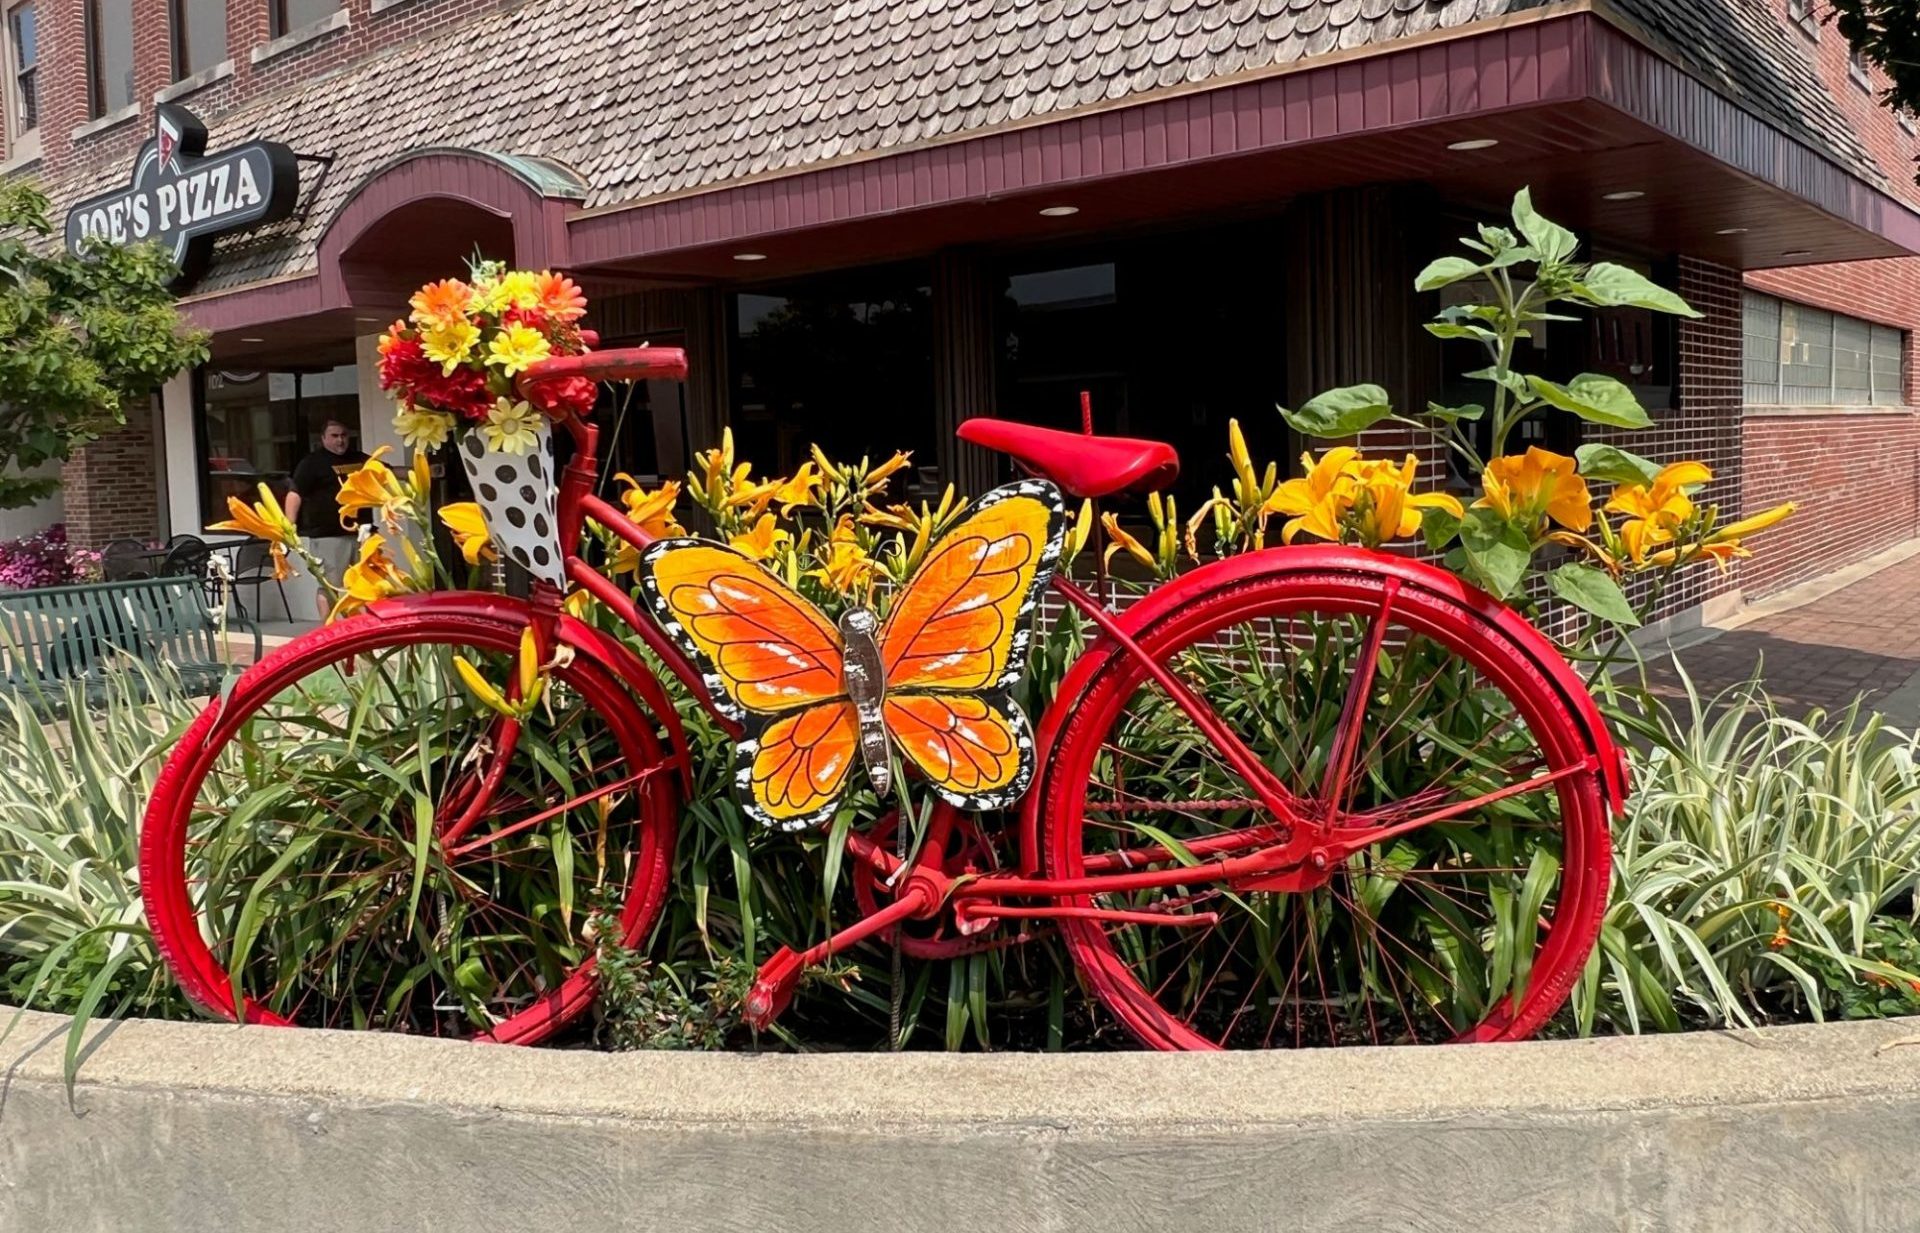 A cement planter is filled with colorful flowers, and a red bicycle decoration with an orange and yellow decorative butterfly.